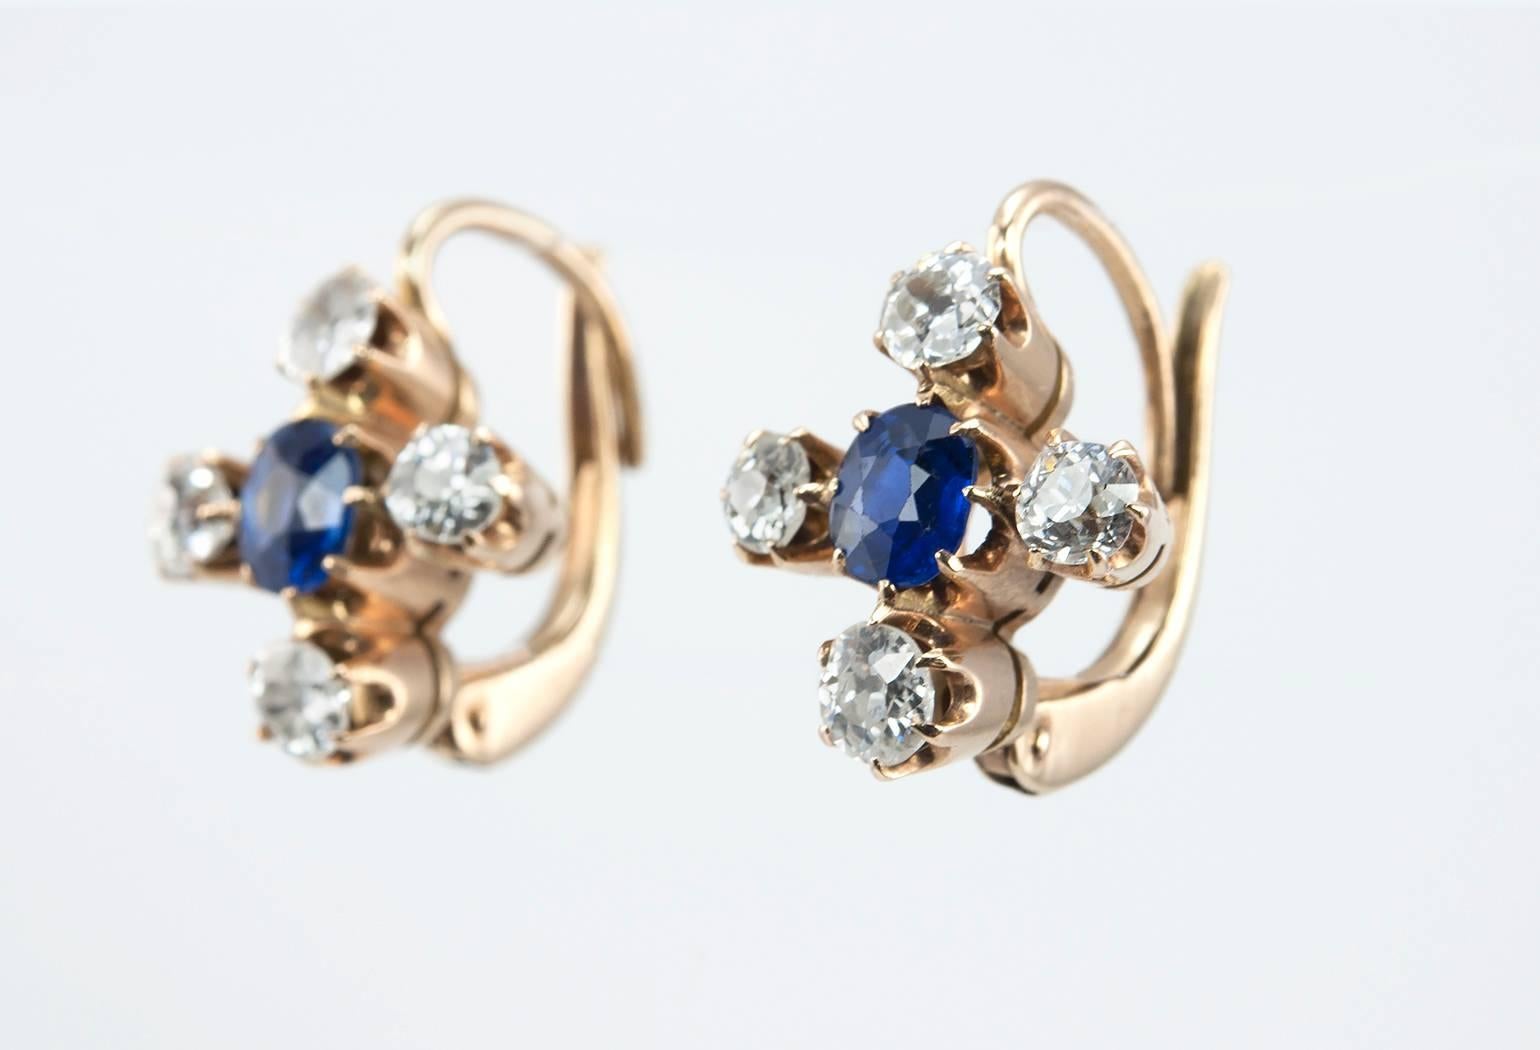 Sapphire and diamond drop earrings in 14 karat rosy/yellow gold with Russian hallmarks, circa 1900.  These beautiful earrings feature 2 sapphires at the center, approximately 0.70 carats total, with 8 old cut diamonds surrounding the sapphire for a